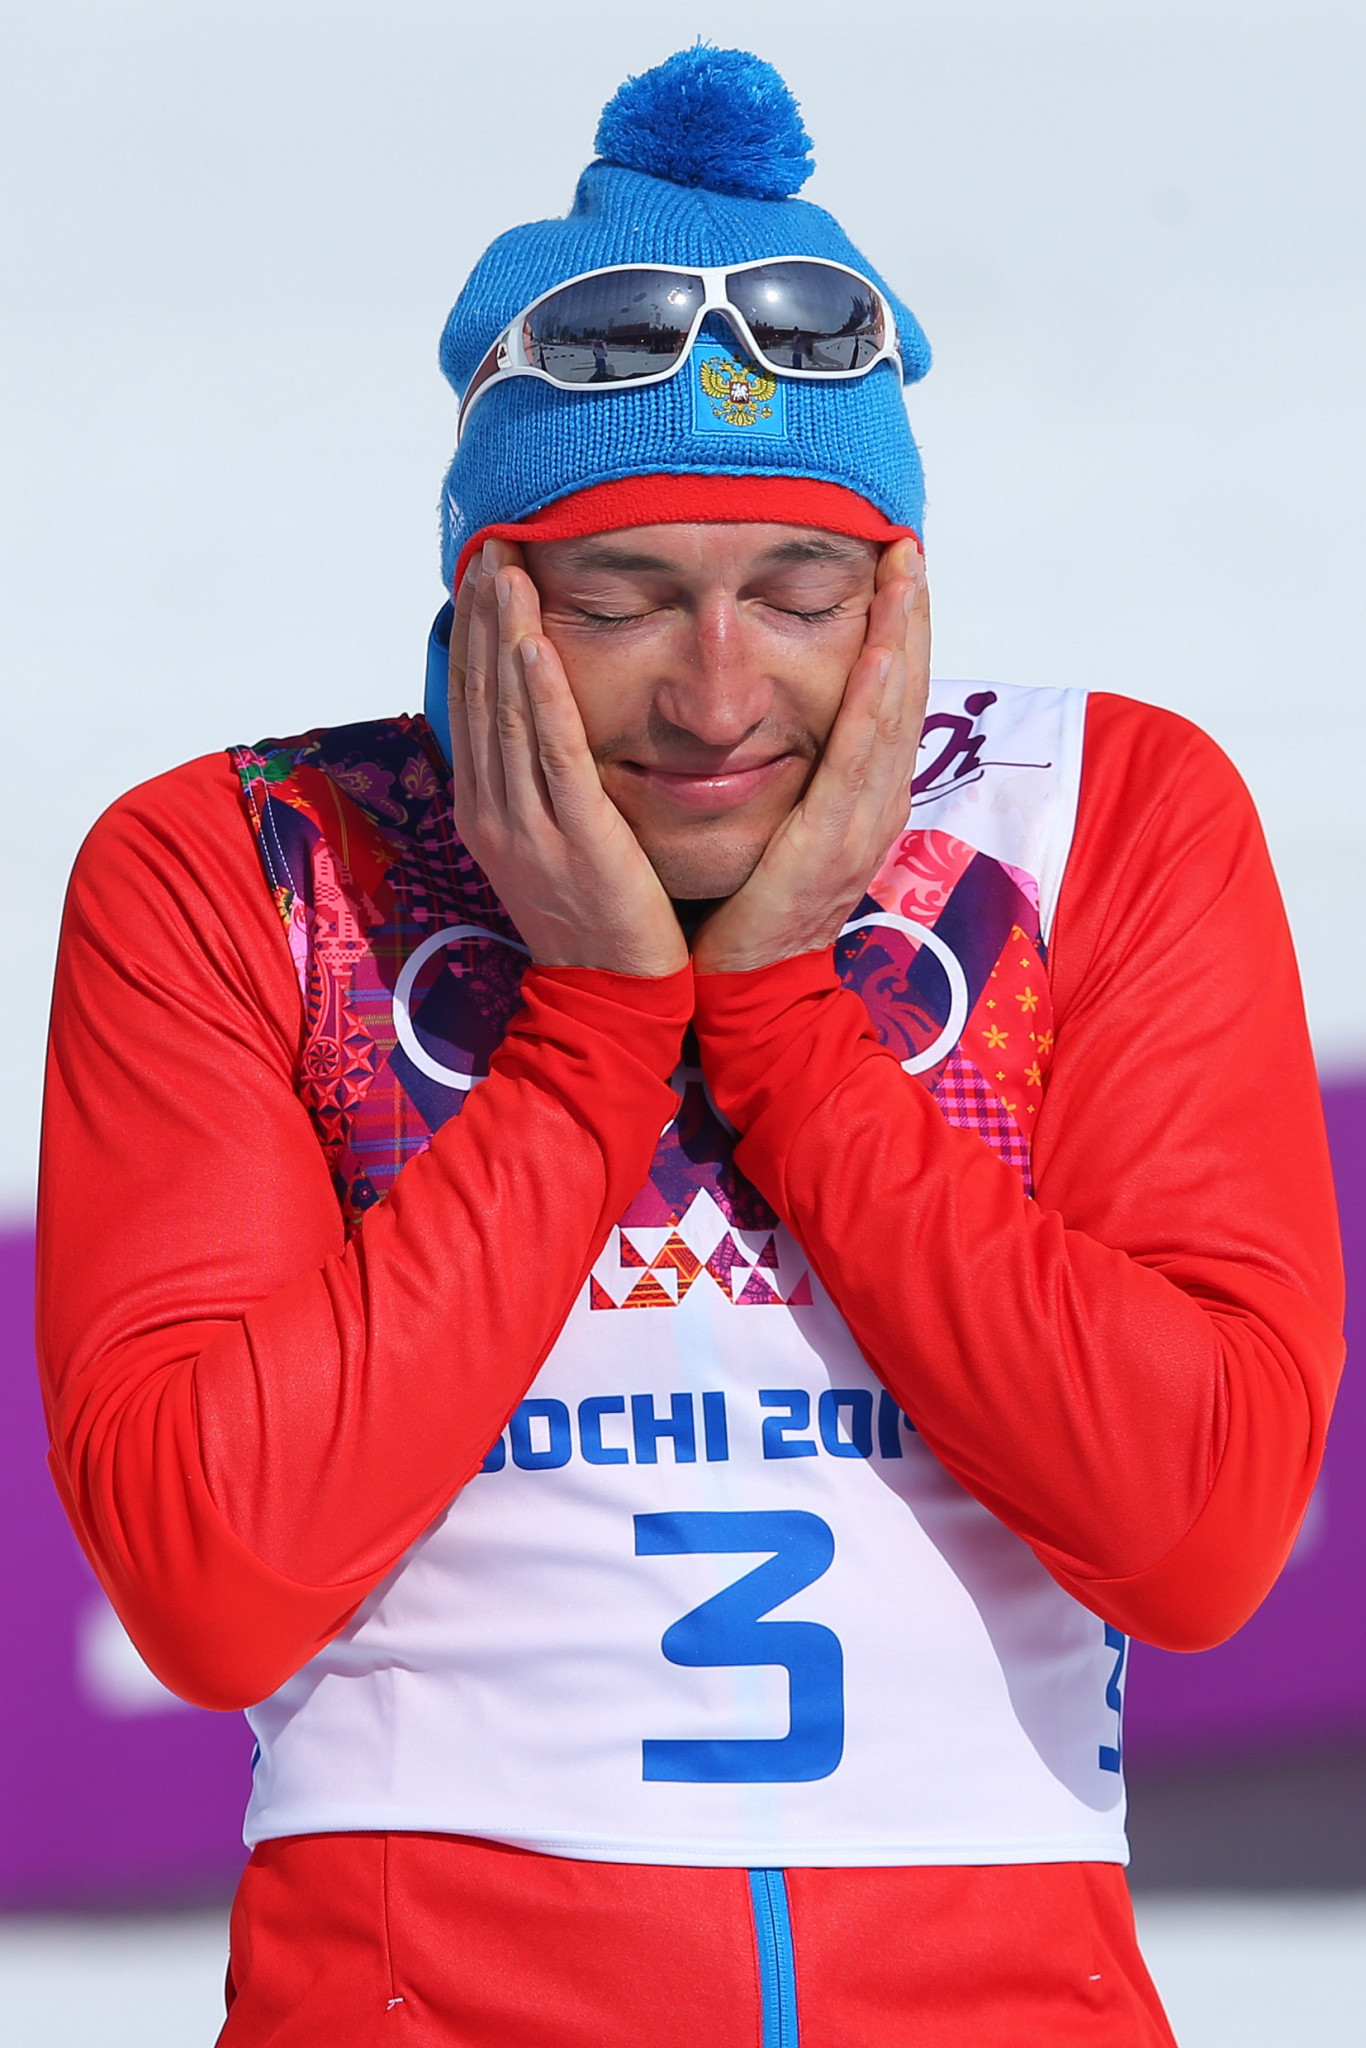 Alexander Legkov, of Russia, looking rather sheepish and with good reason after being stripped of gold and silver medals ©Getty Images